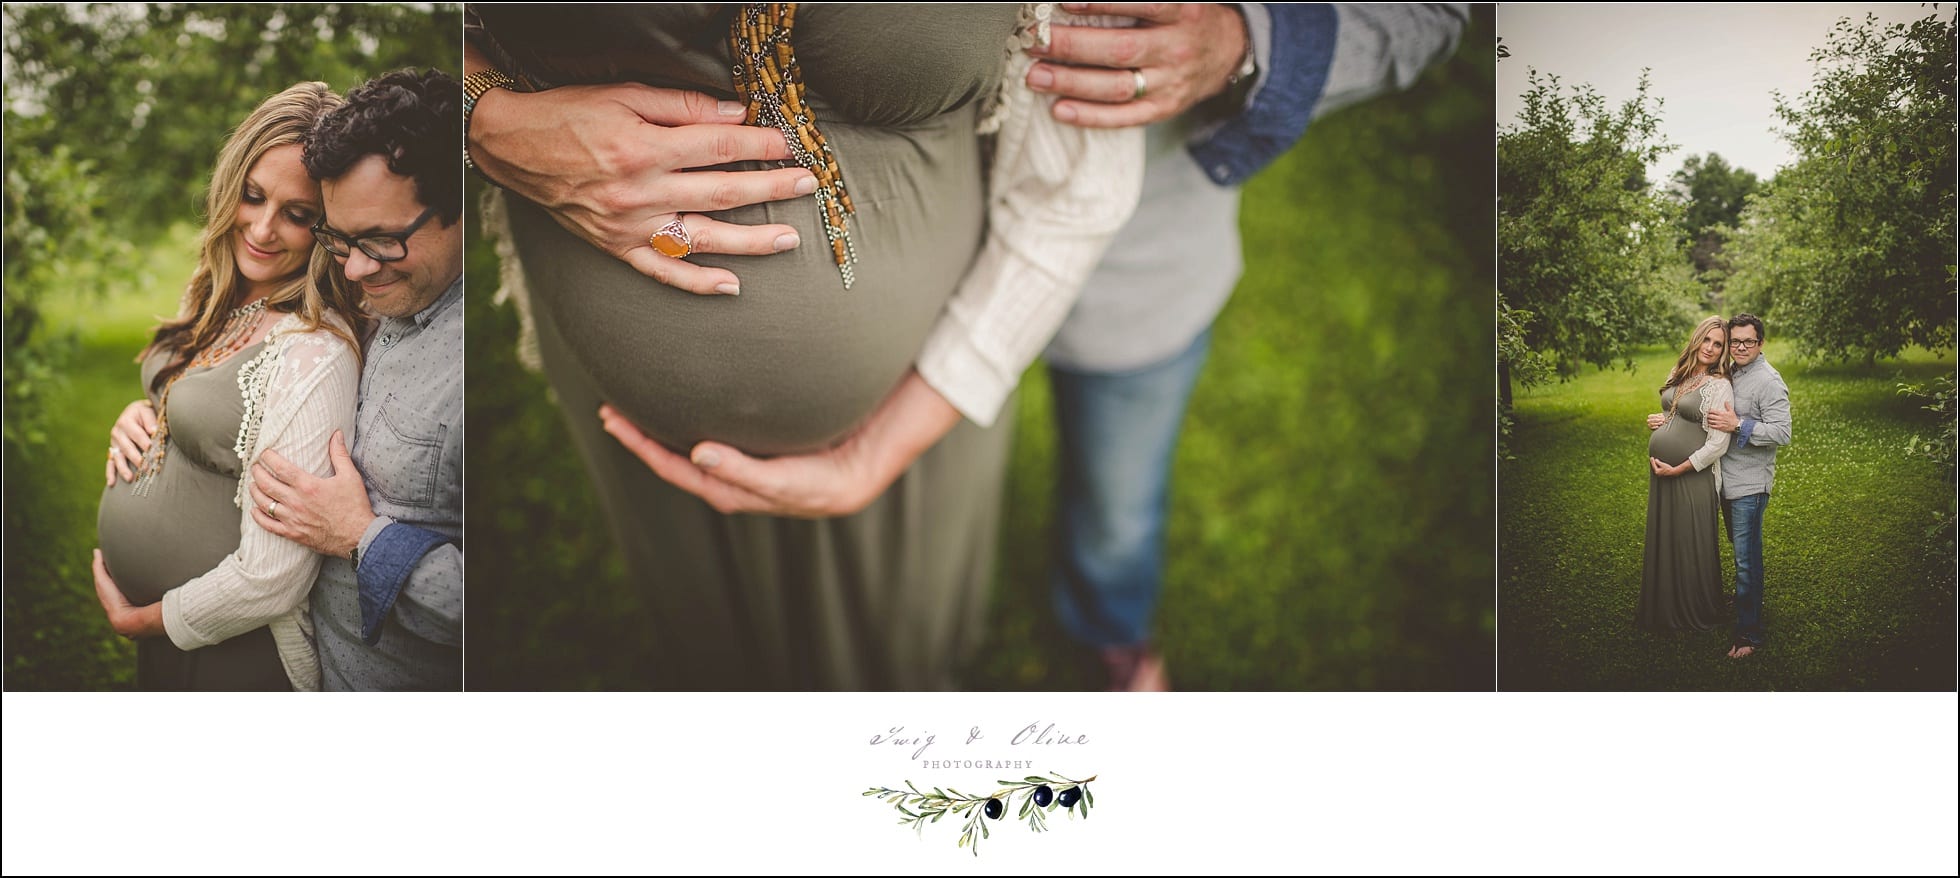 maternity, moms, dads, dresses, summertime, family sessions